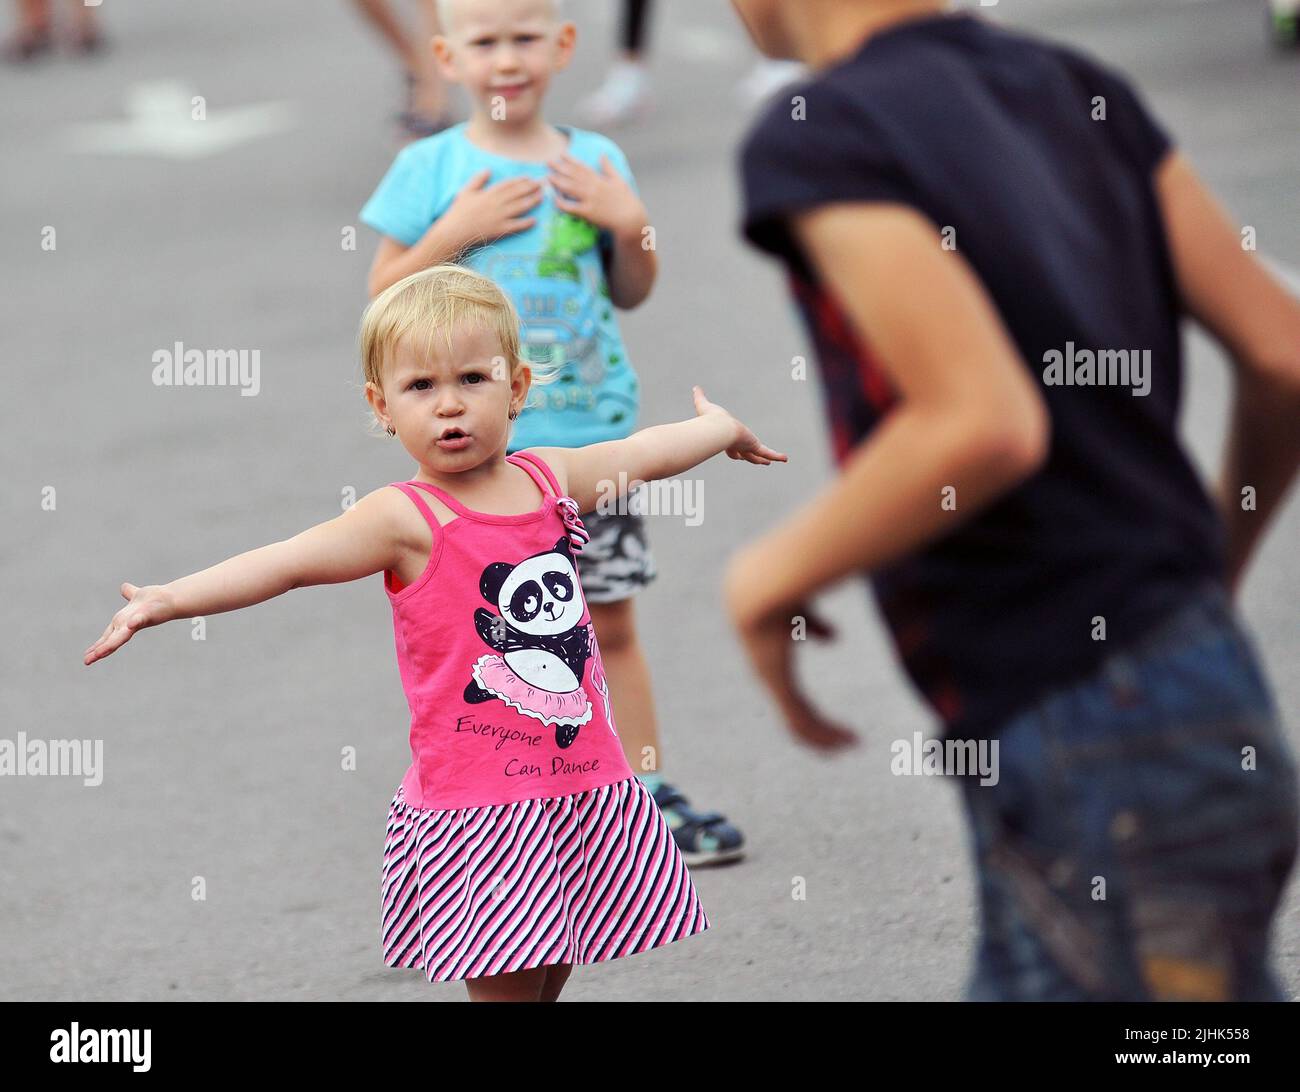 ZAPORIZHZHIA, UKRAINE - JULY 17, 2022 - A little girl is pictured at the IDP Reception Centre which helps people who fled the Russian aggression, Zapo Stock Photo